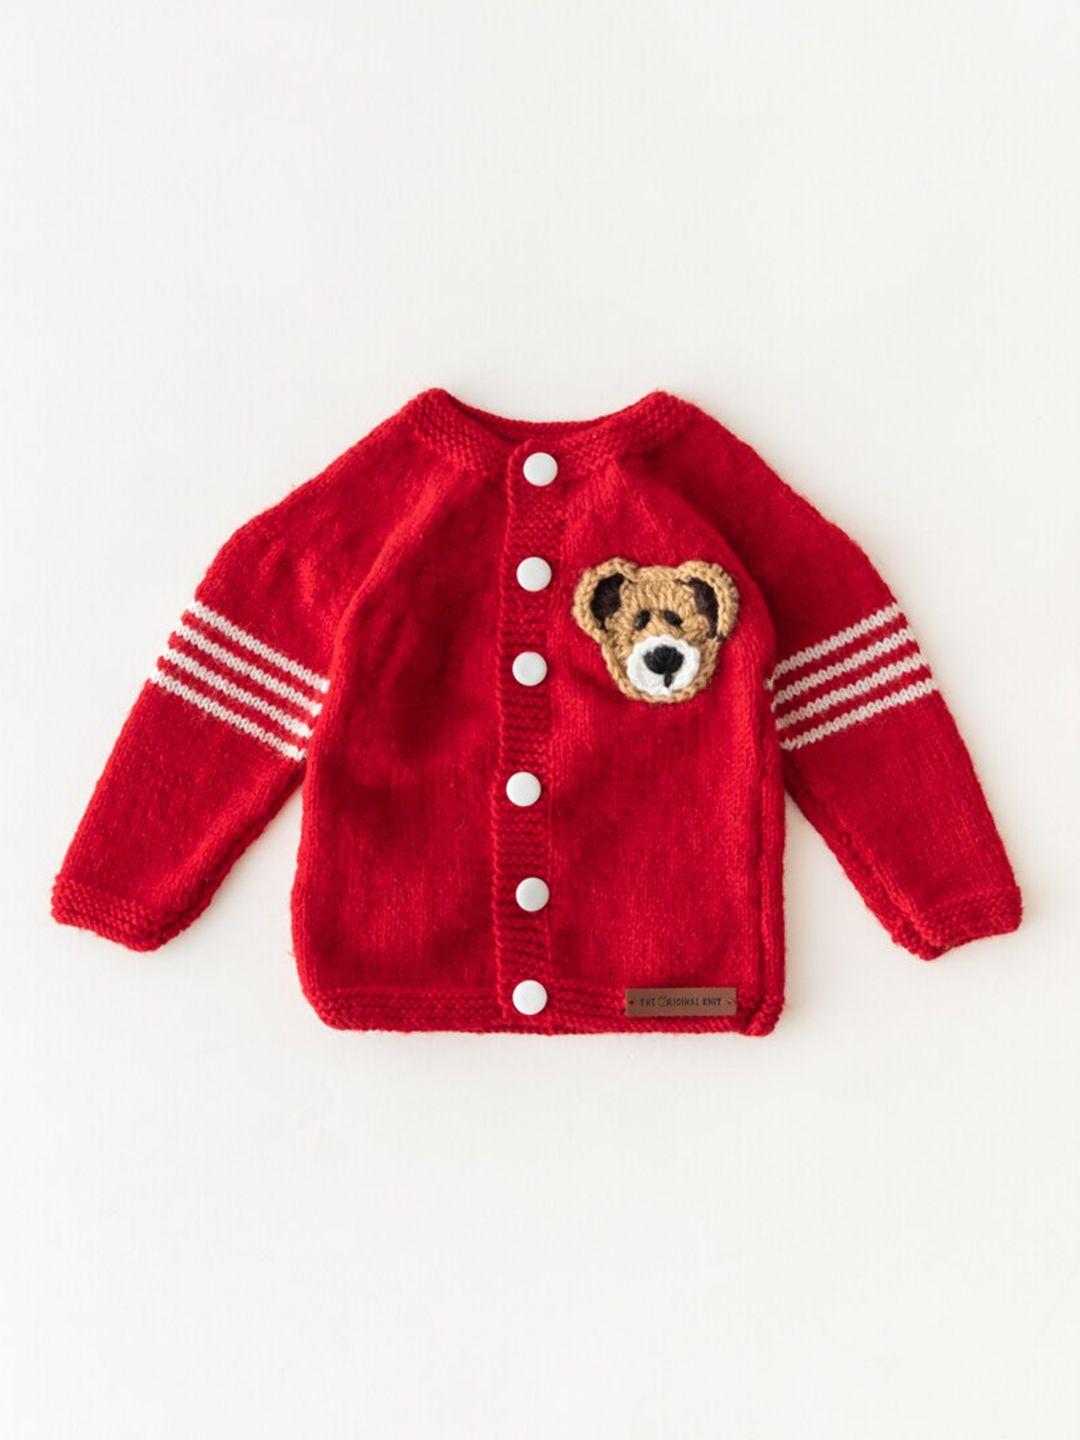 the original knit unisex kids red & white striped cardigan with applique detail